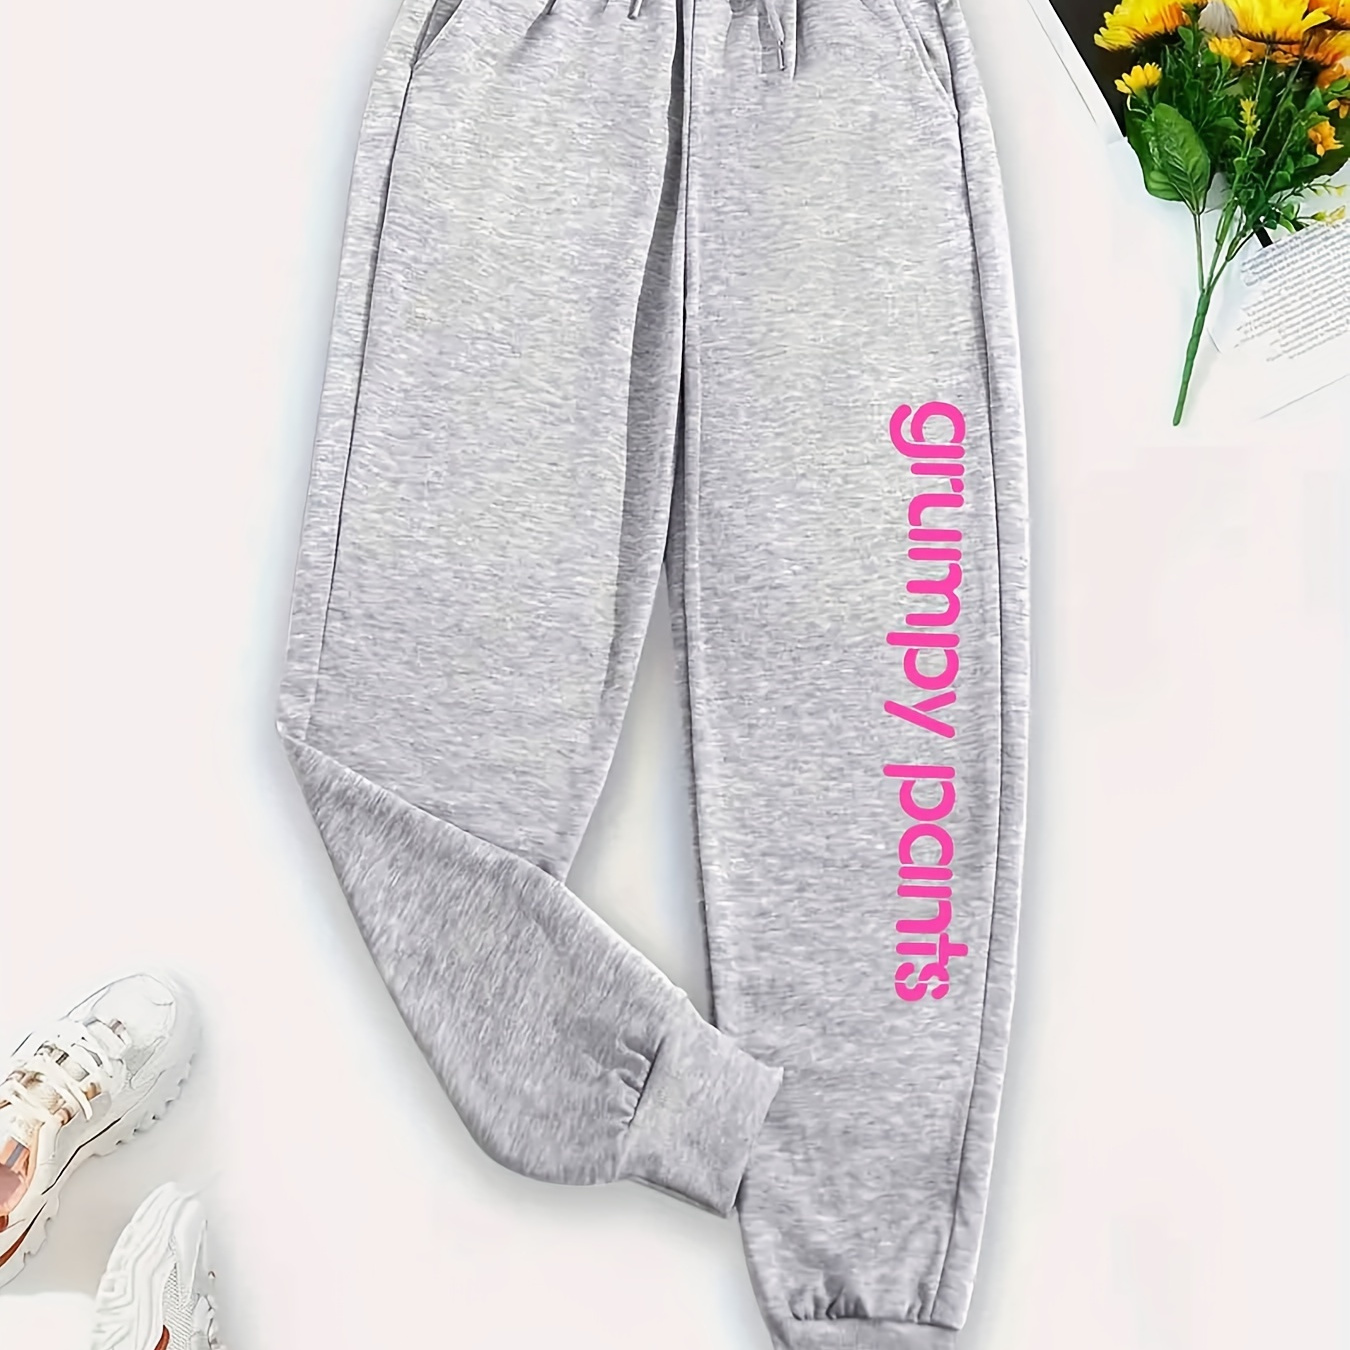 

Women's Grumpypants Joggers, Elastic Waist Drawstring Sweatpants, Casual Athletic Pants For Spring/autumn Fall, Comfy Sport Style Lounge Wear